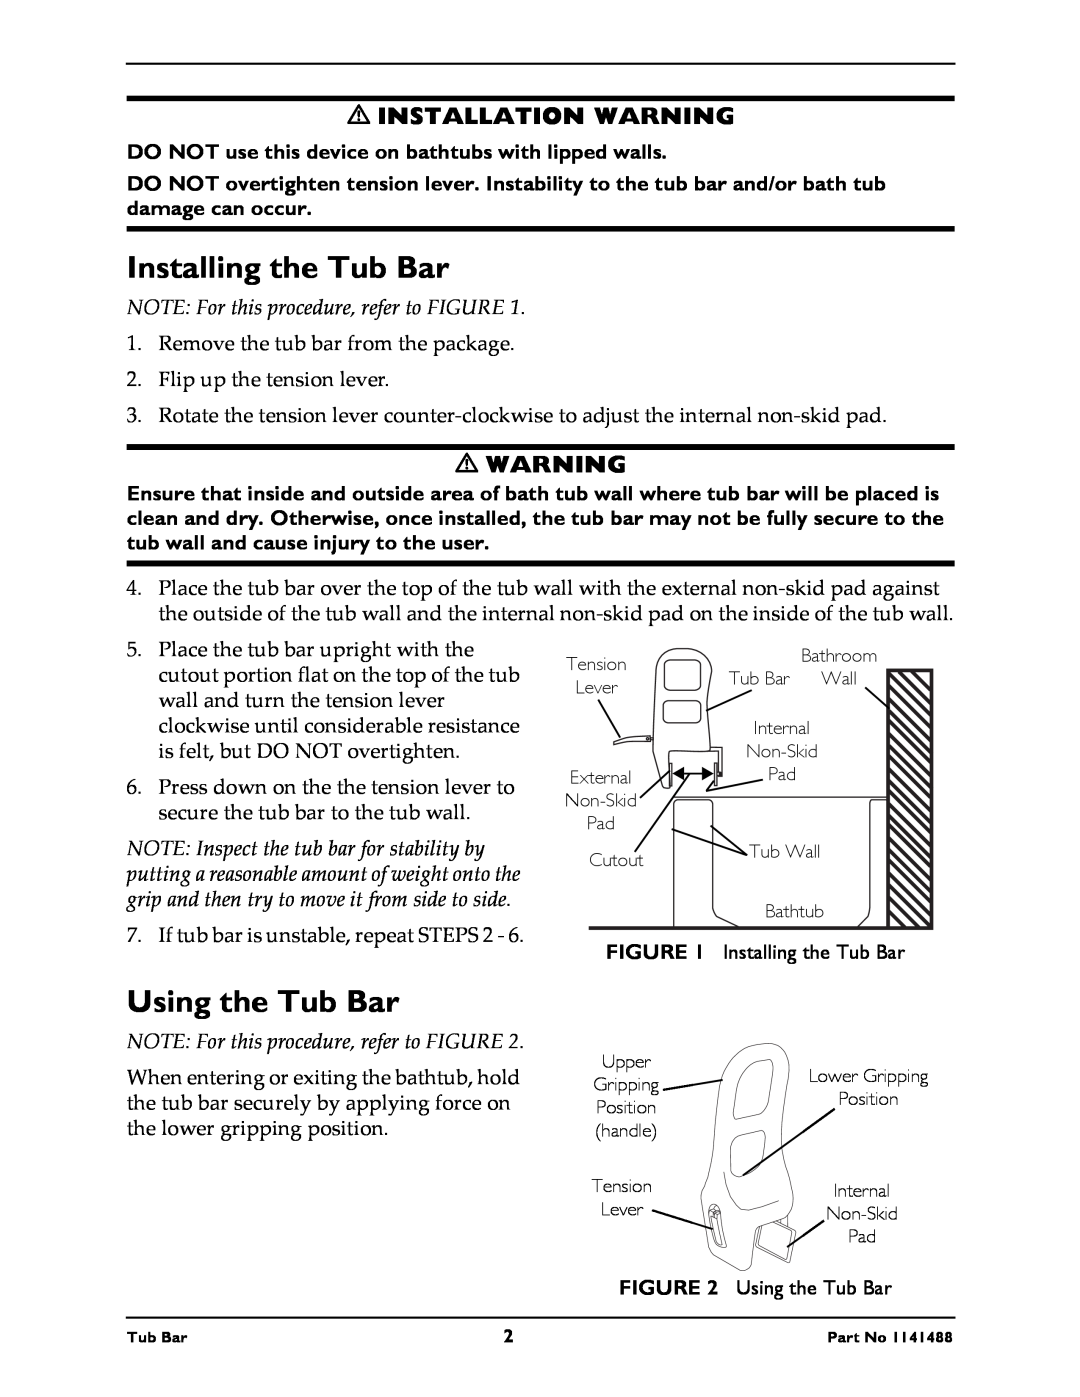 Invacare 710 Installing the Tub Bar, Using the Tub Bar, NOTE For this procedure, refer to FIGURE, Installation Warning 